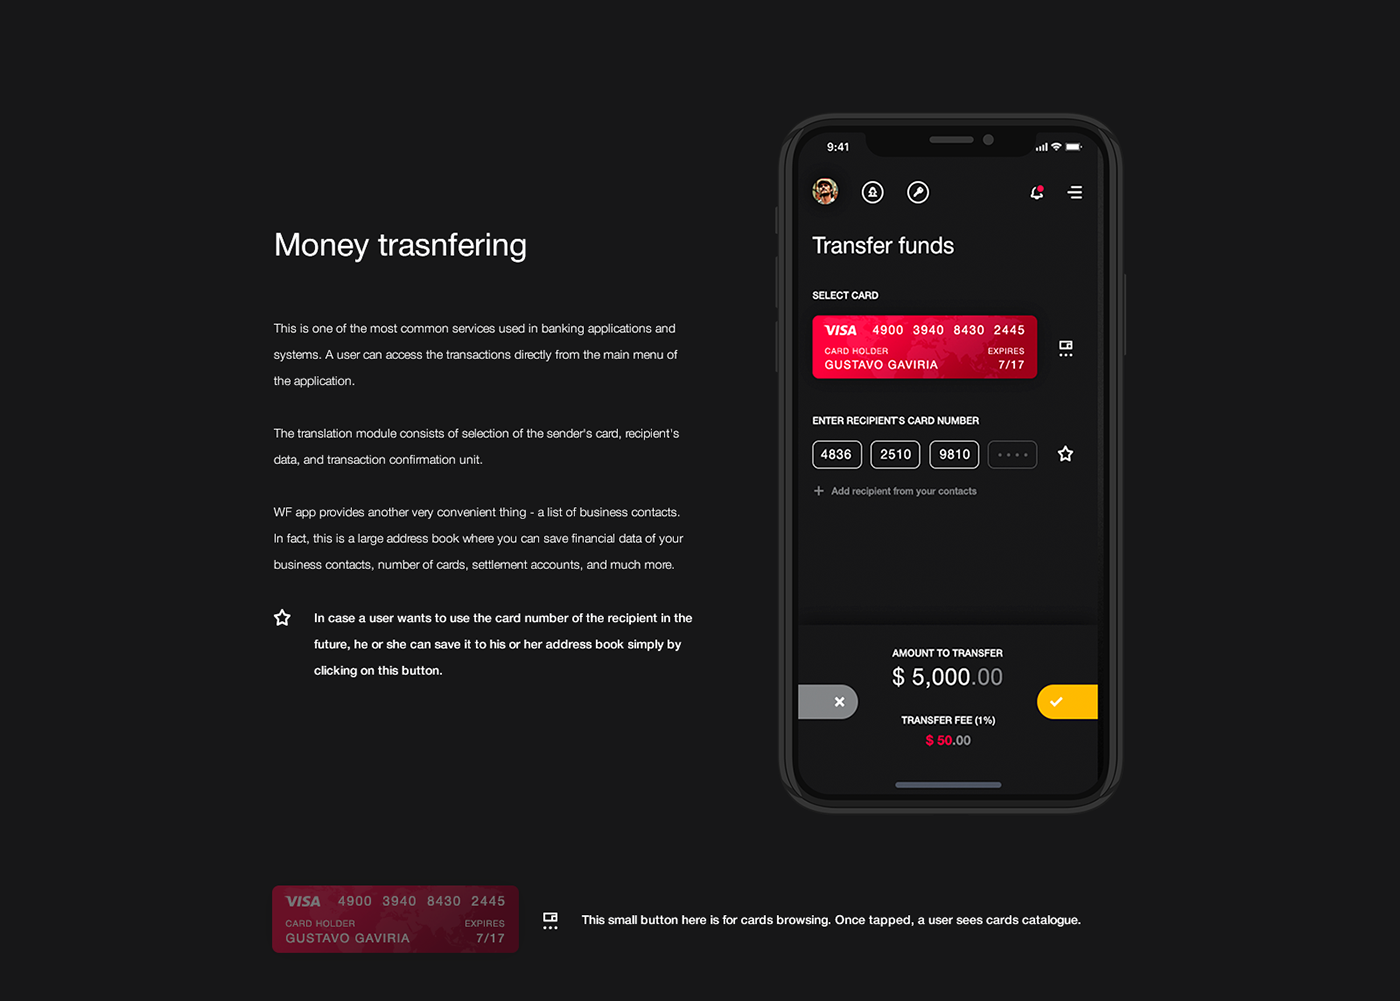 app Bank mobile banking uiux interaction application ios android design